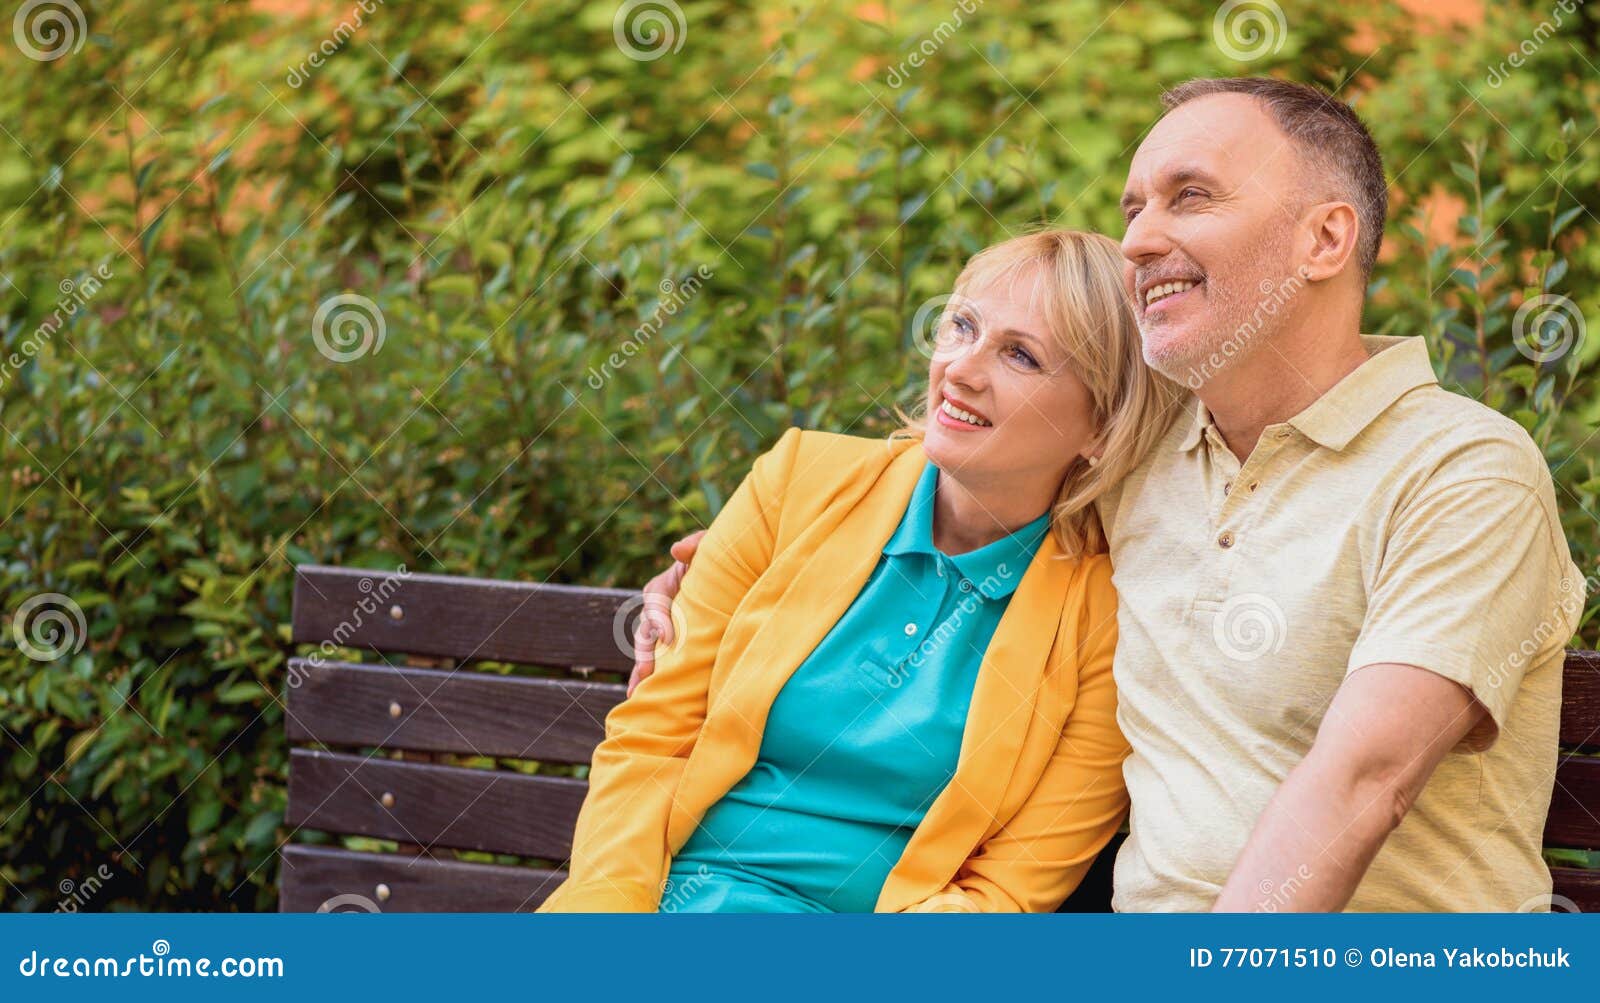 Mature Man and Woman Dating in Nature Stock Photo